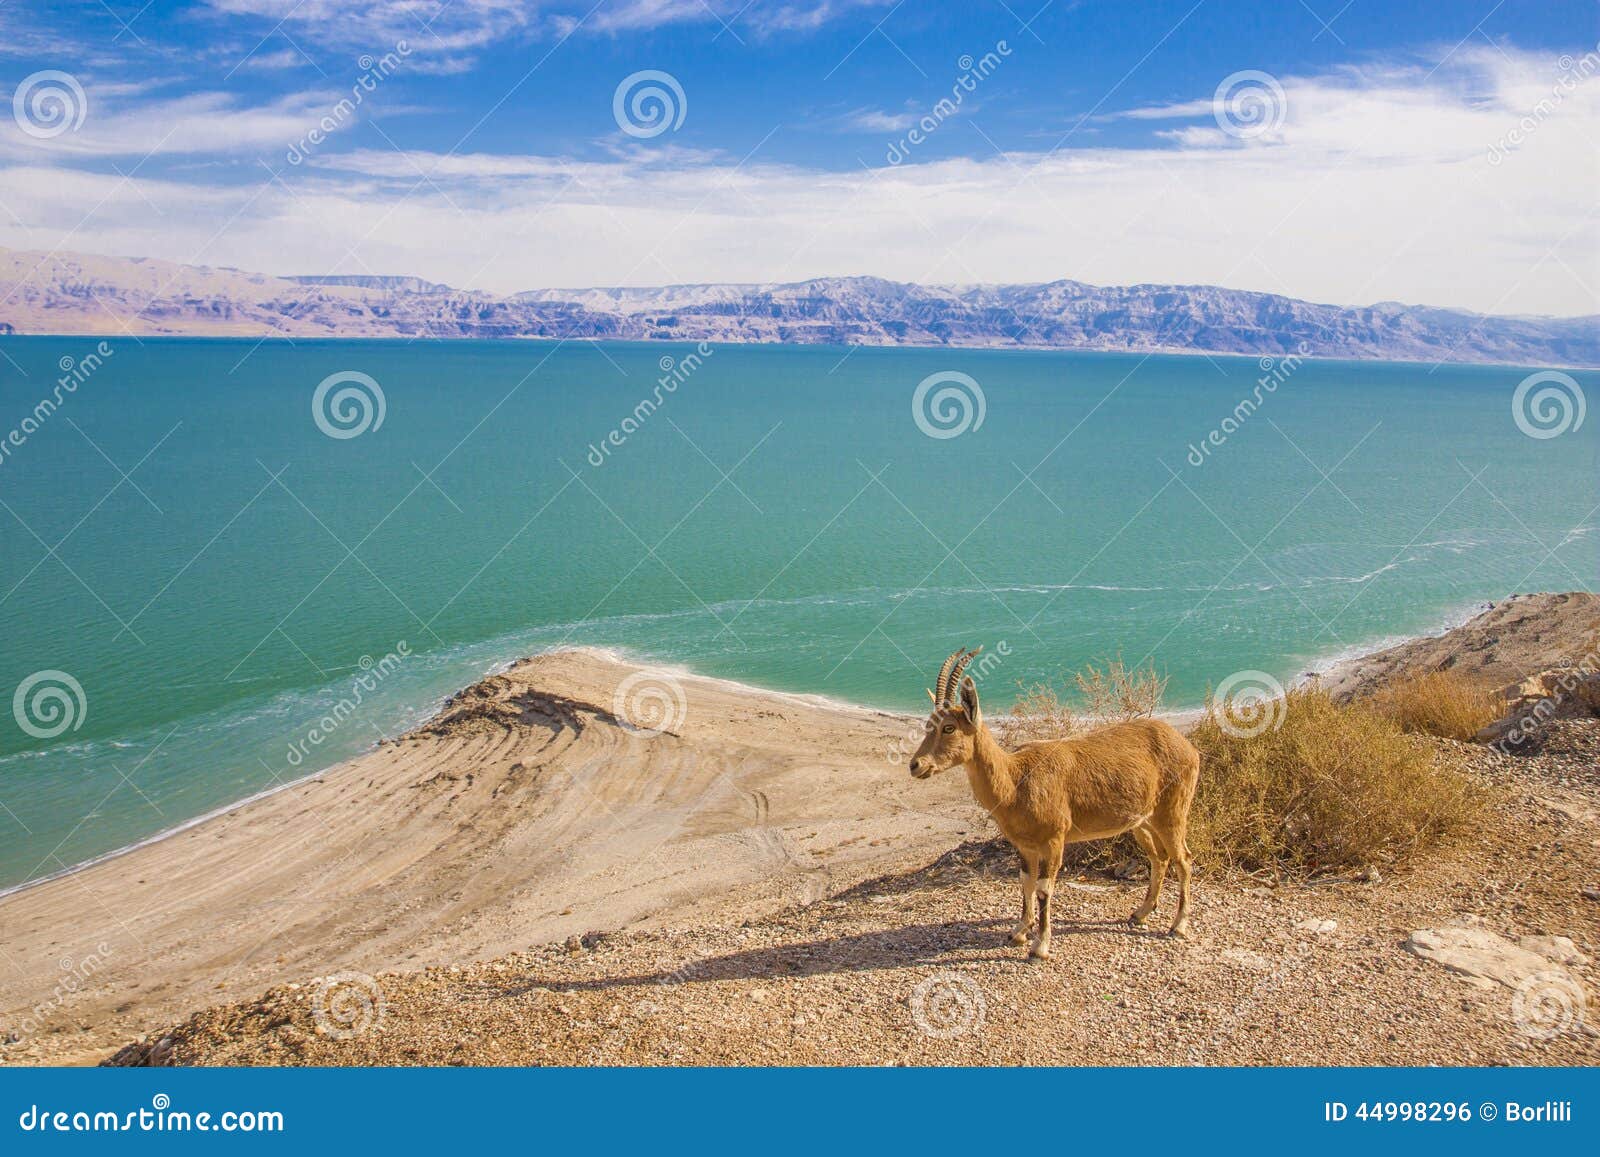 ein gedi is an oasis in the desert and a green garden of eden in the wilderness